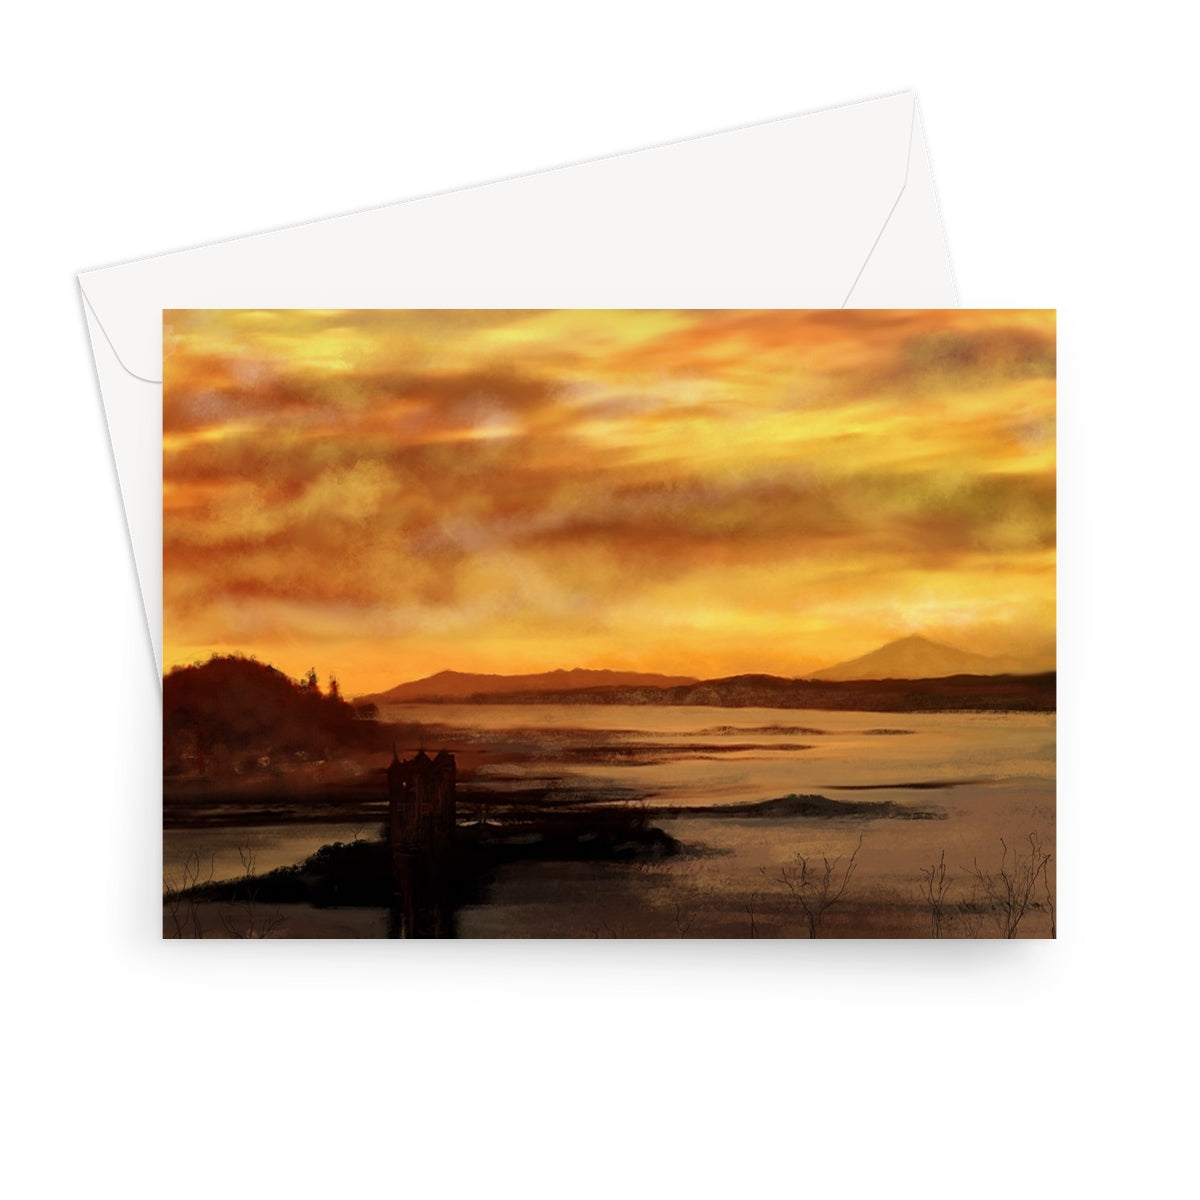 Castle Stalker Dusk Art Gifts Greeting Card-Greetings Cards-Historic & Iconic Scotland Art Gallery-7"x5"-1 Card-Paintings, Prints, Homeware, Art Gifts From Scotland By Scottish Artist Kevin Hunter